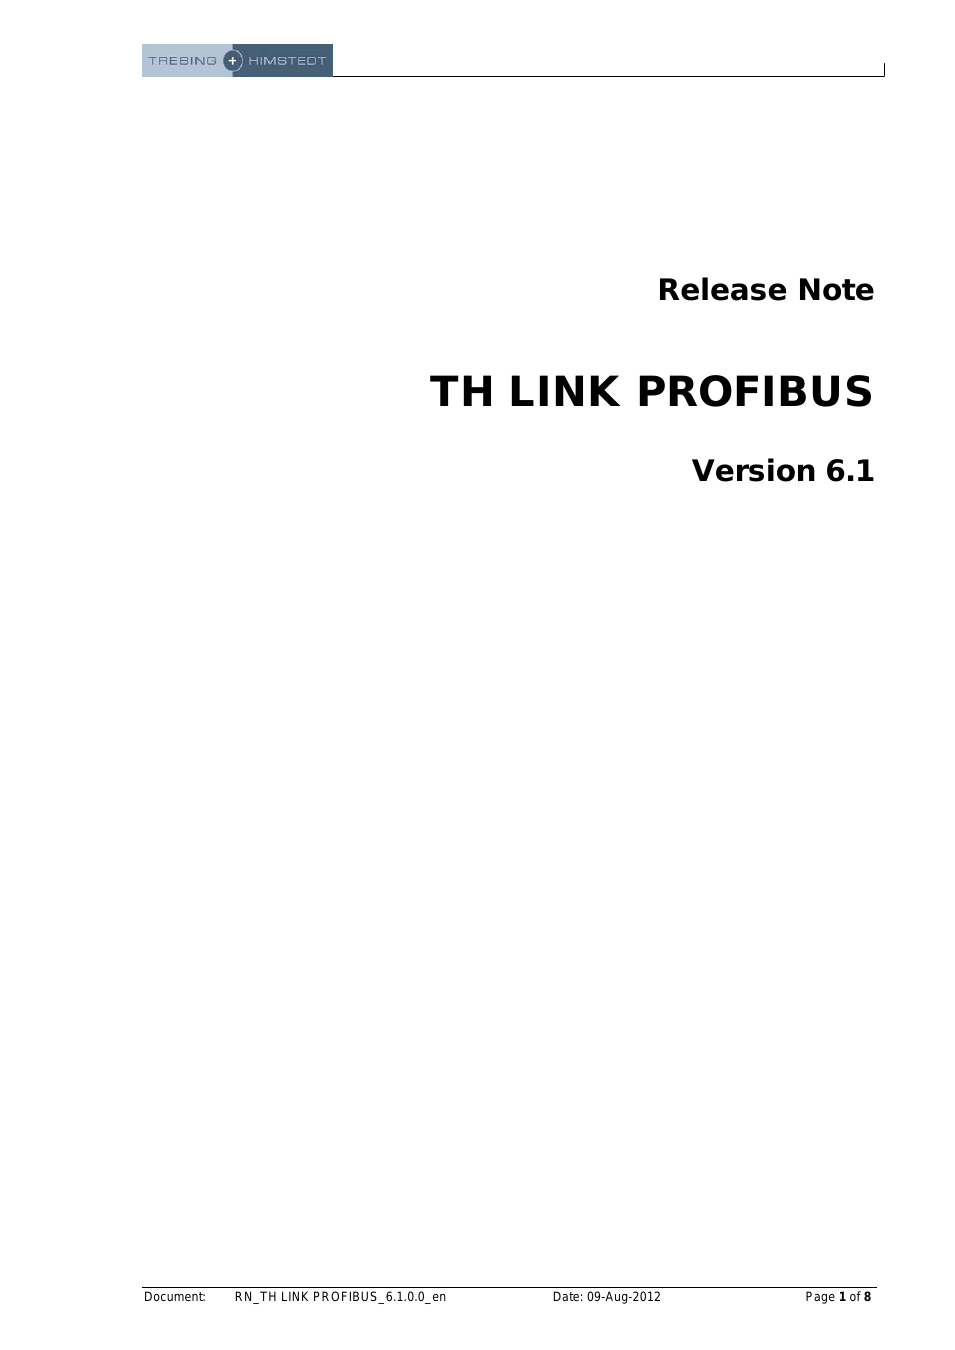 TH LINK PROFIBUS Version 6.1 Release Note